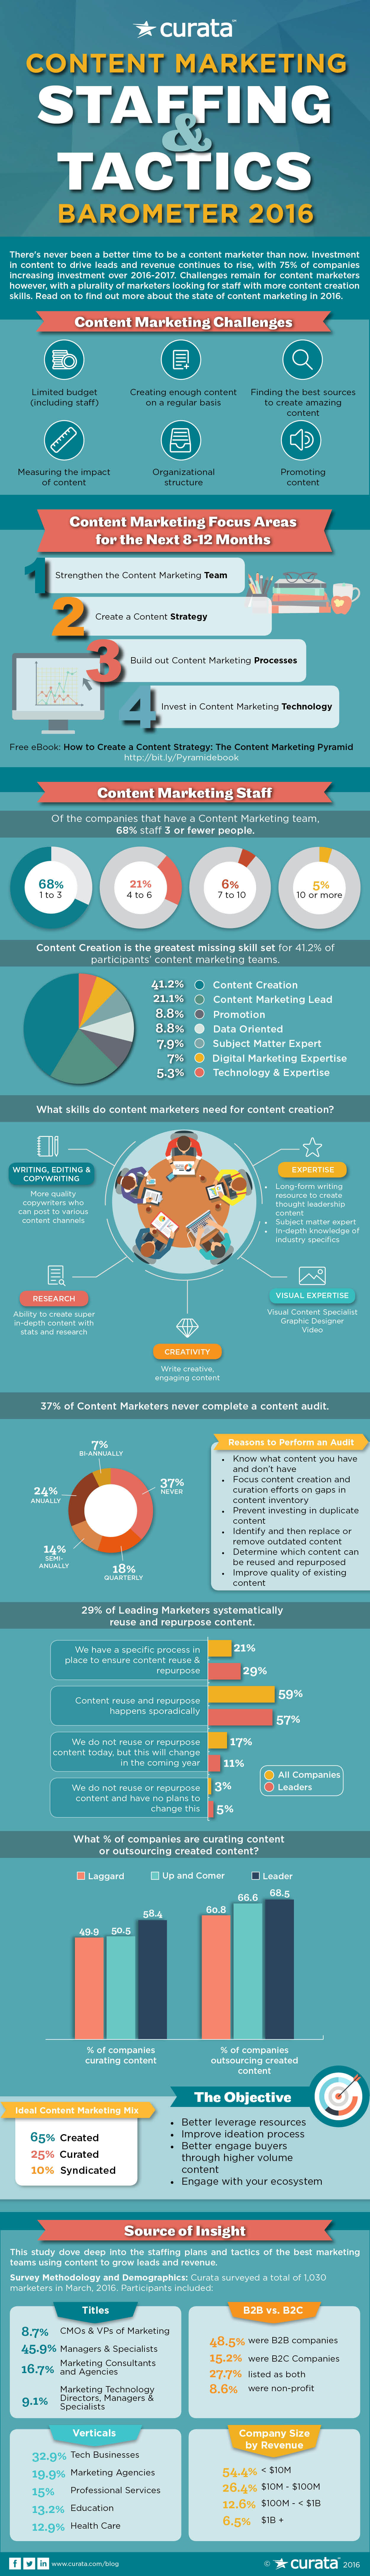 2016 Content Marketing Infographic